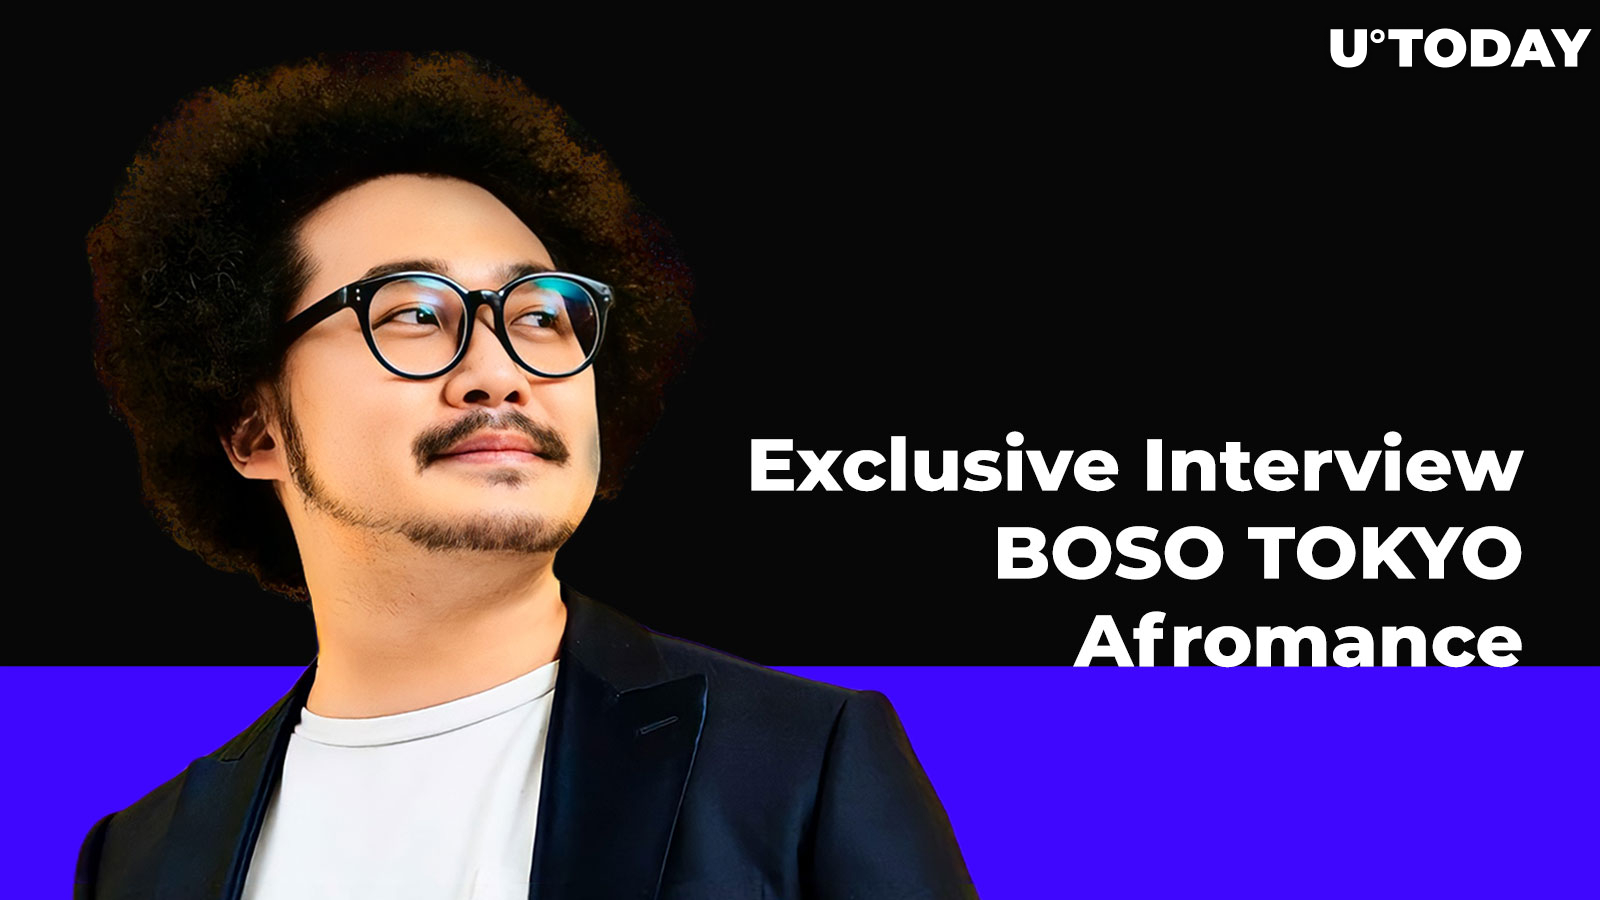 What Should Your Identity in Metaverse Be Like? NFT Avatars, Anime and Japanese Bikers in This Interview with BOSO TOKYO Creative Director